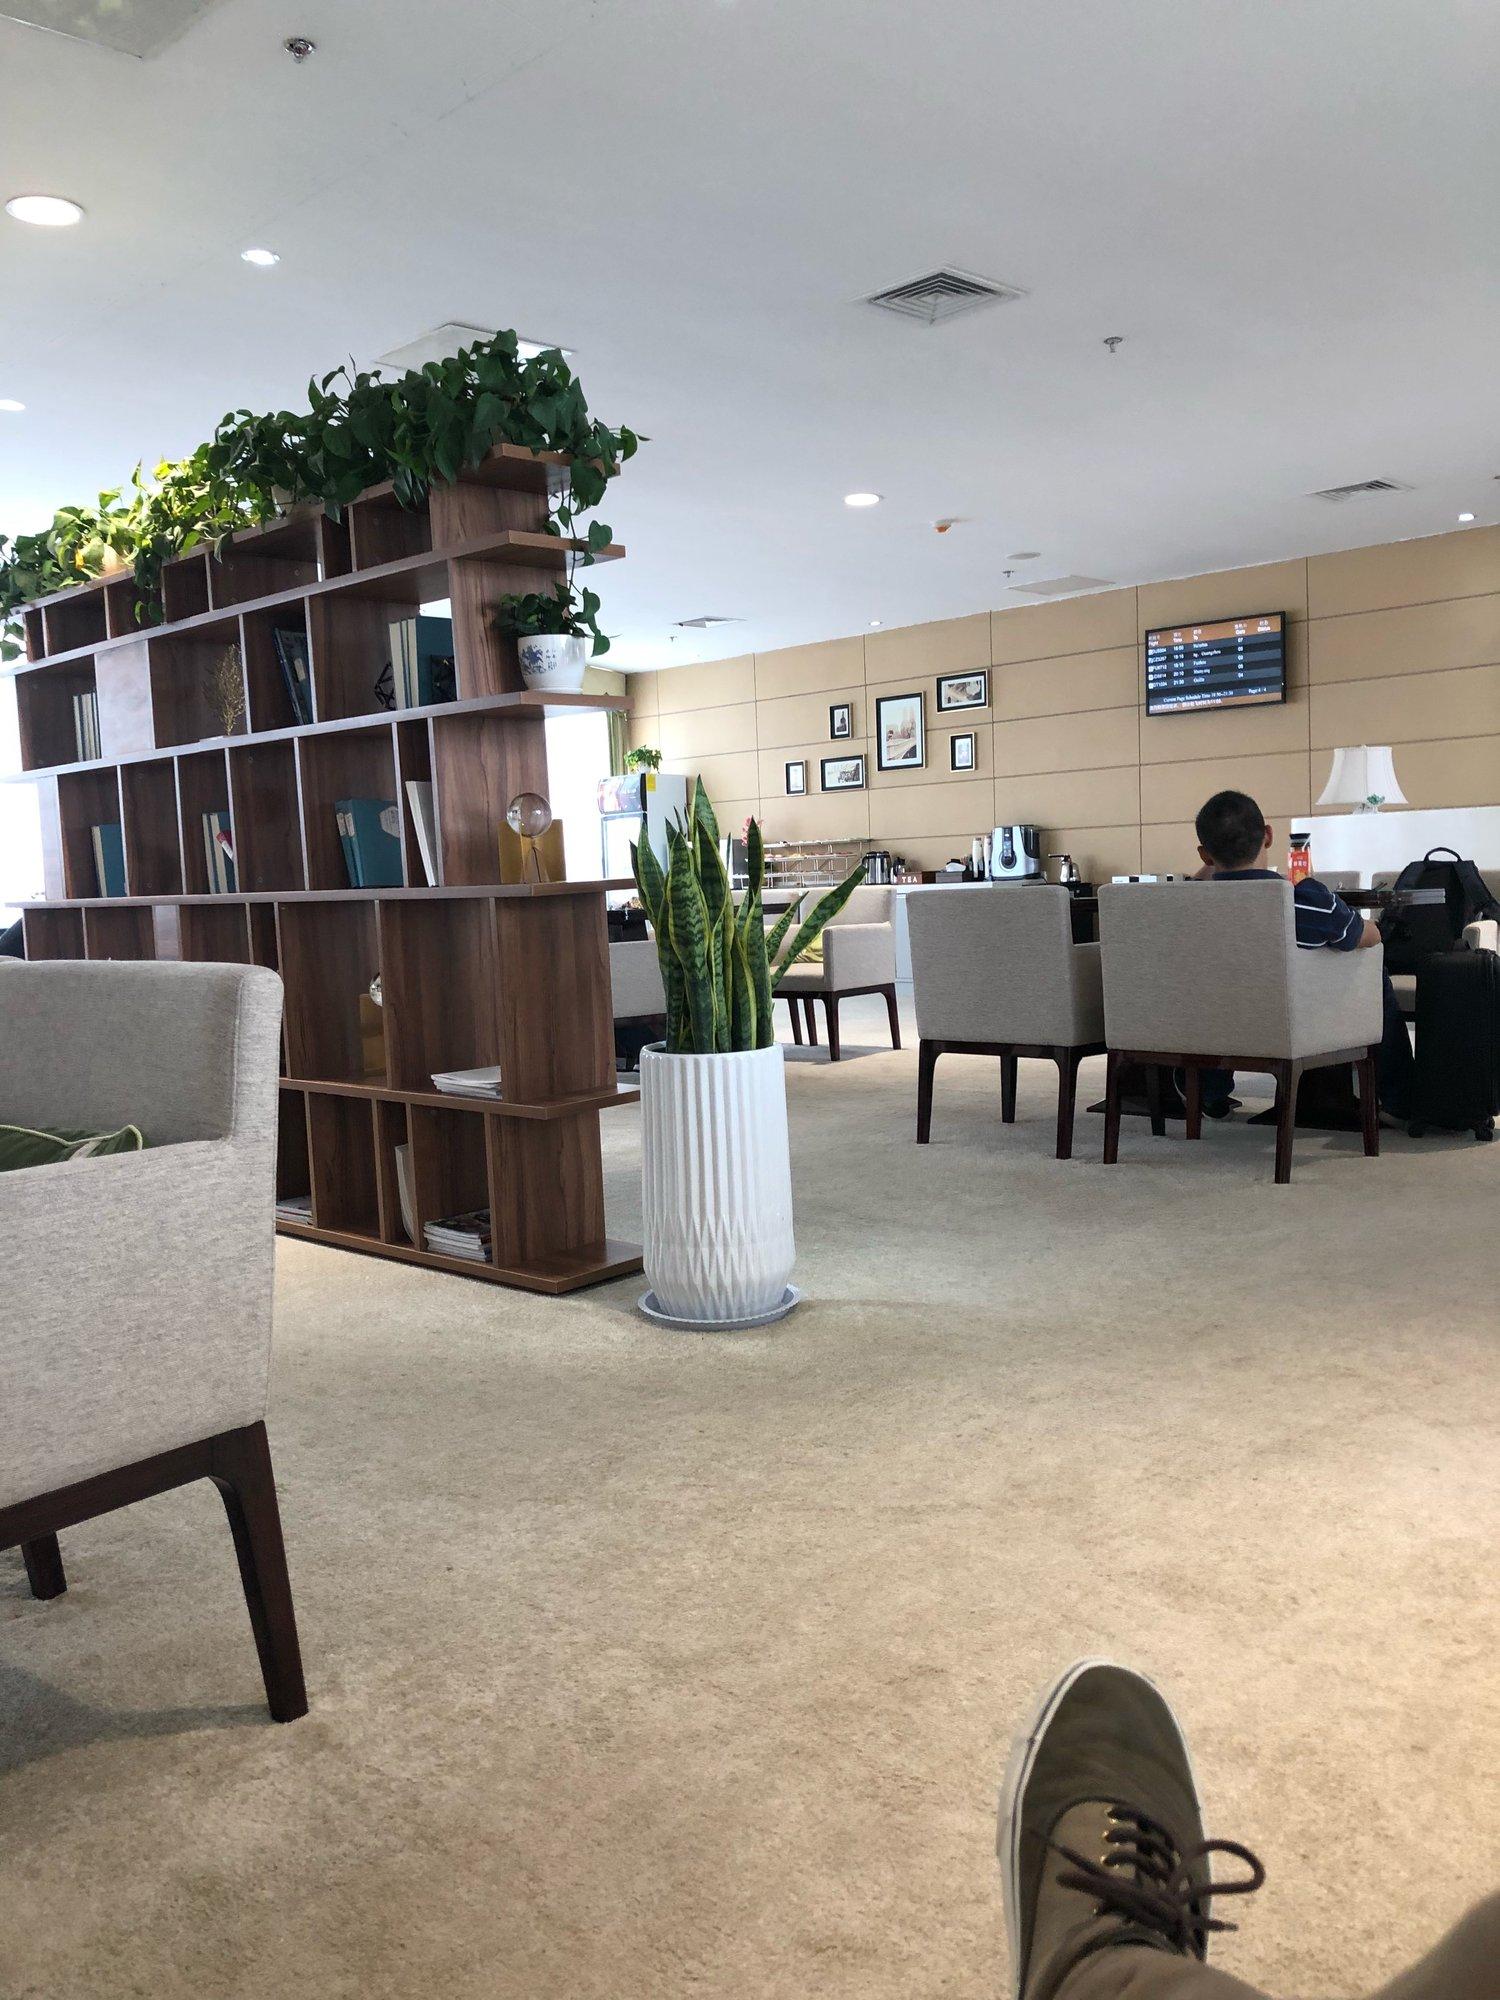 Domestic First Class Lounge image 1 of 1